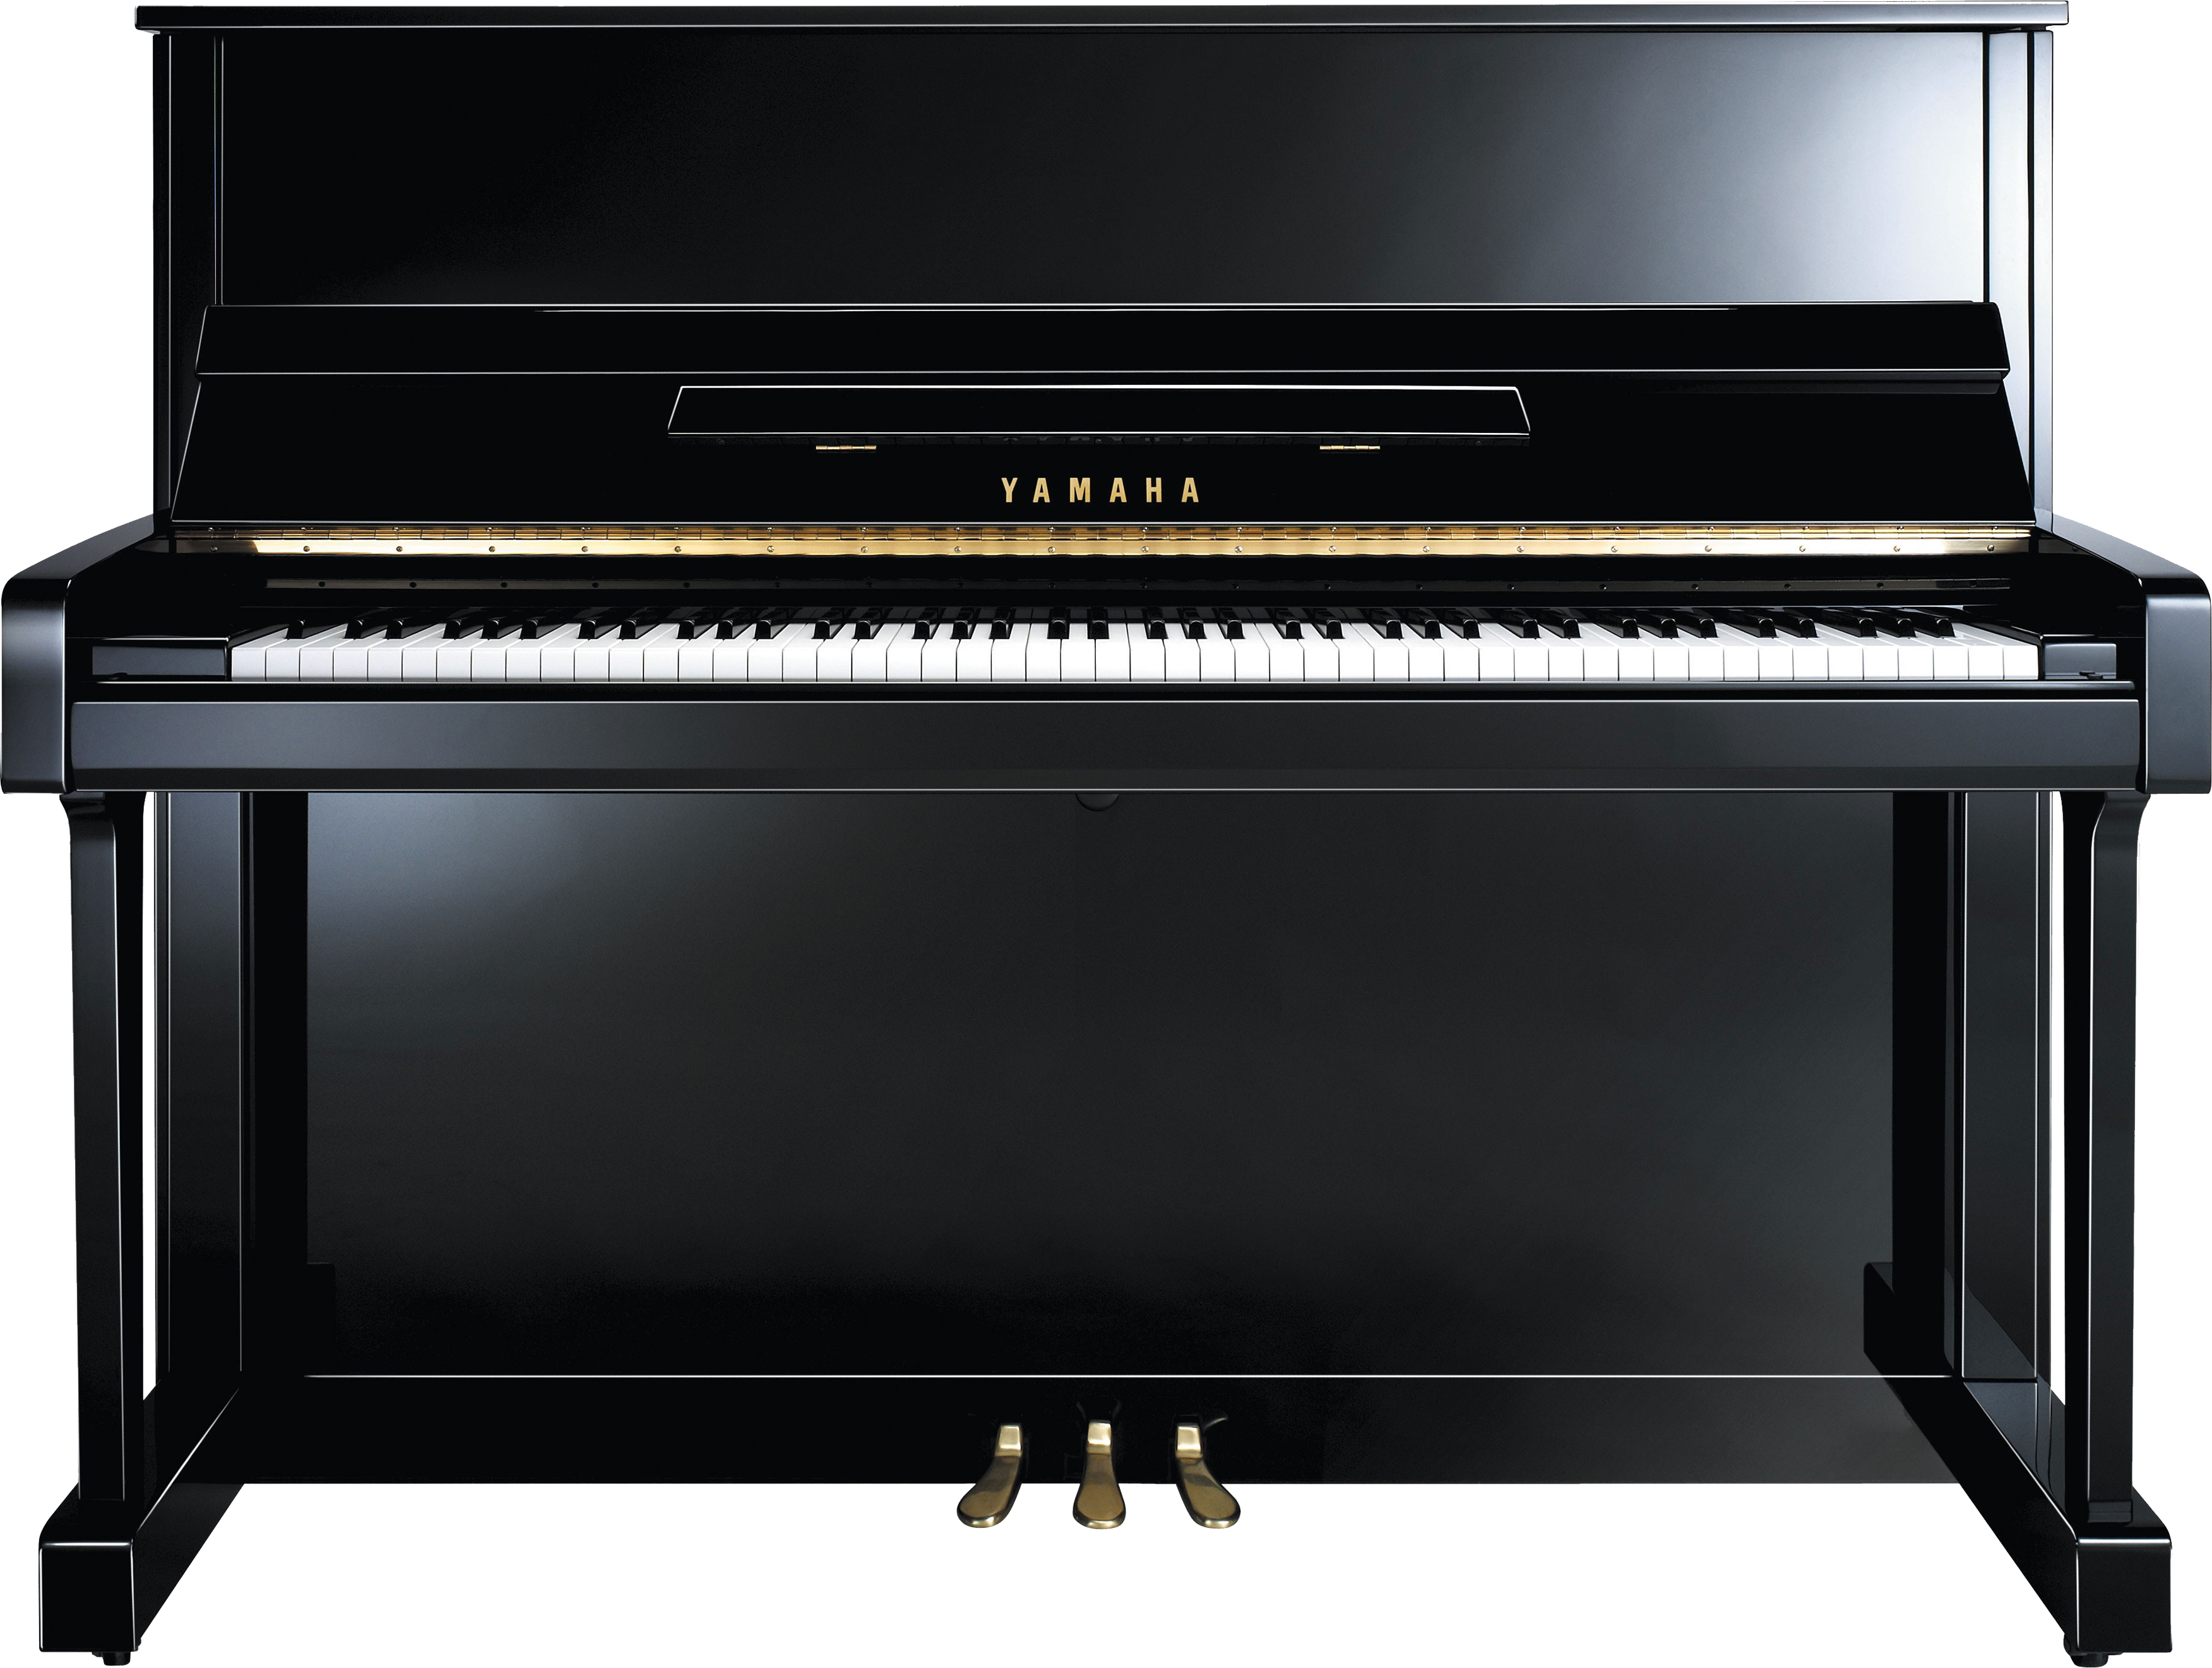 Piano Picture PNG Image